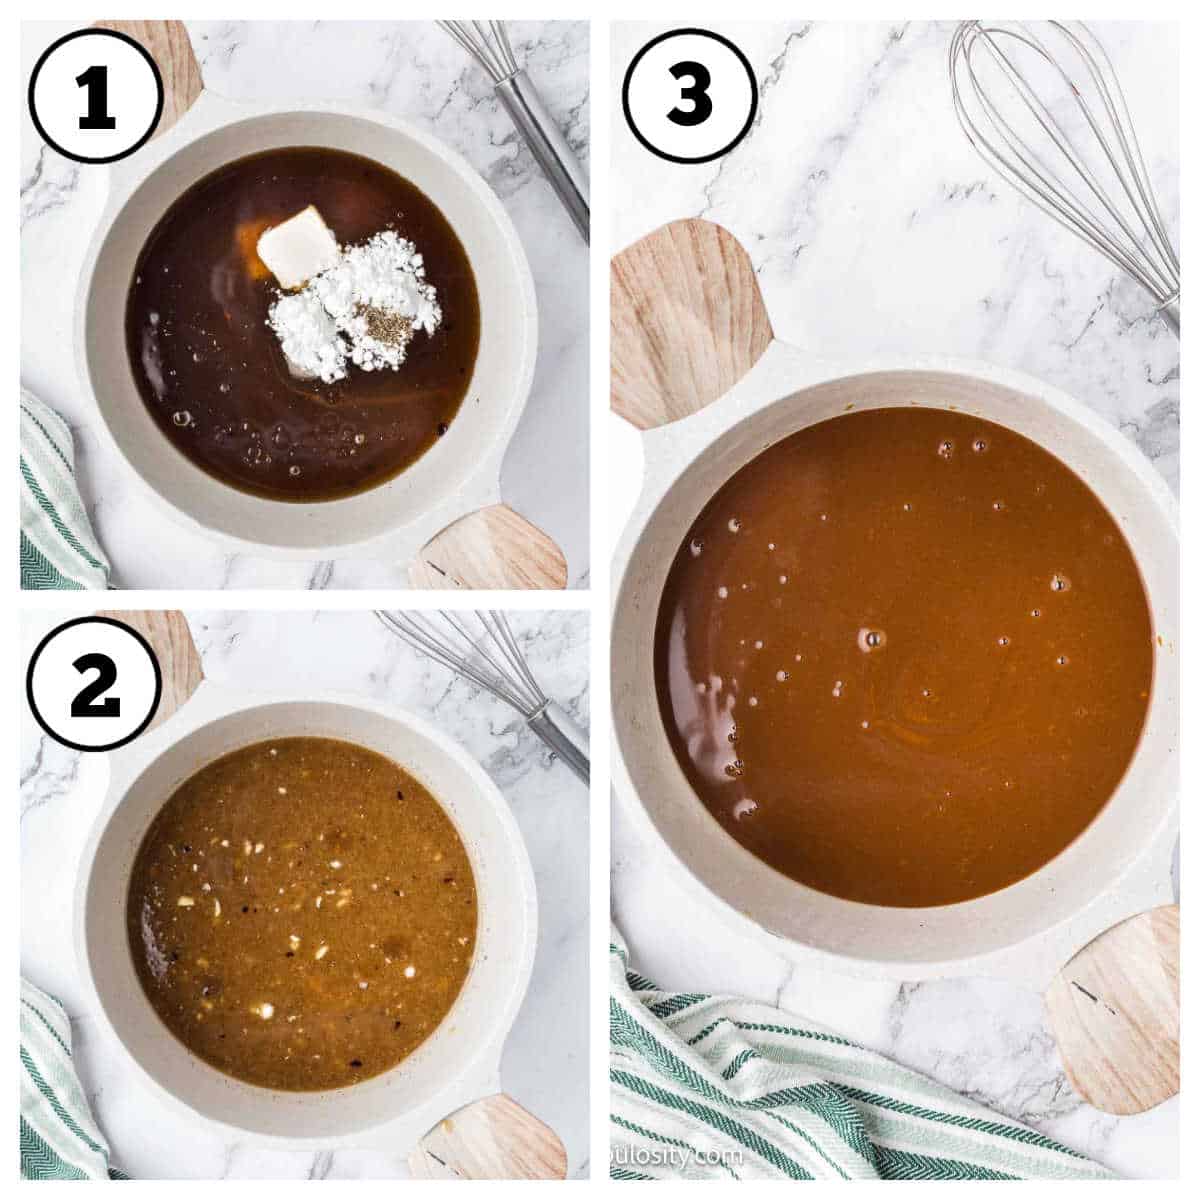 Image collage showing the three steps of making pork gravy.